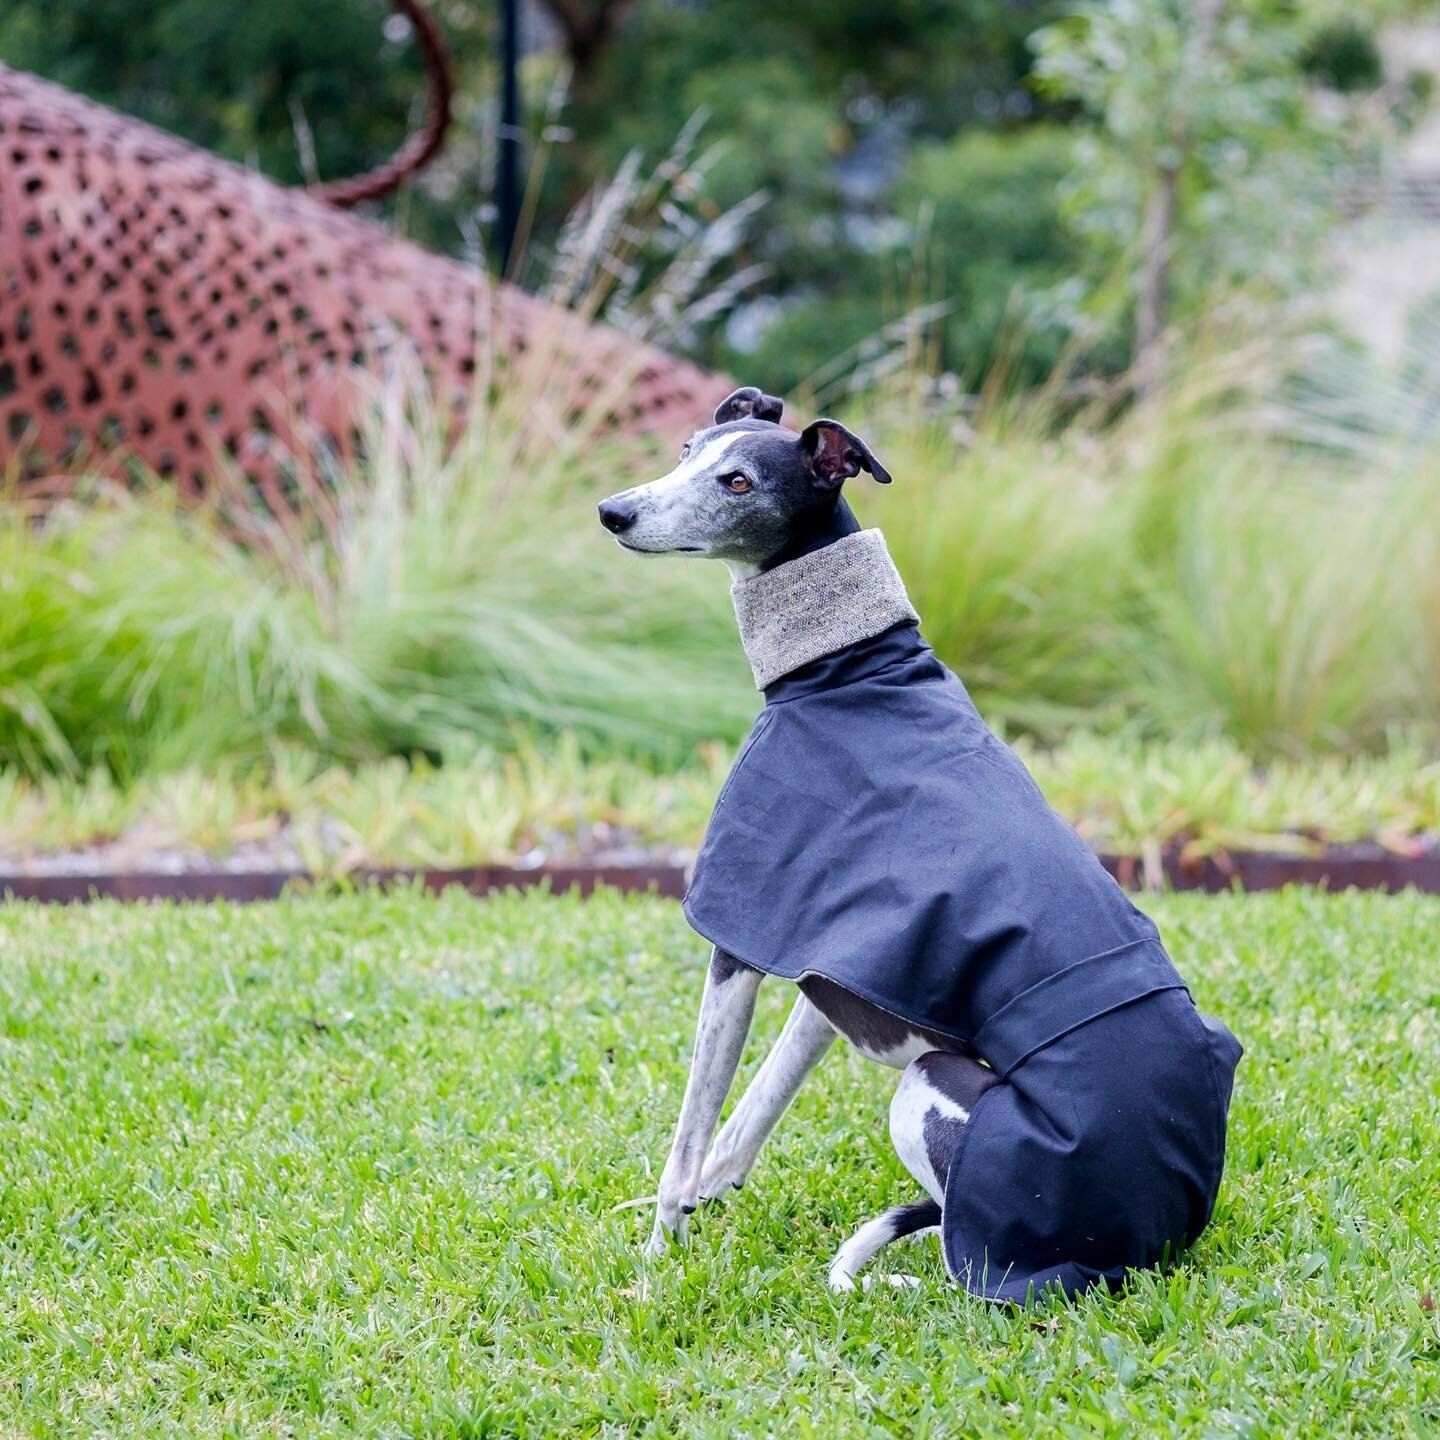 Our new Tweed Coat 👌🏻 a sturdy coat that will be a timeless classic in your wardrobe.

📸 @astroboywhippet 
.
.
#whippetsofinstagram #sighthoundsofinstagram #whatmyhoundworetoday #whatmywhippetworetoday #greyhoundsofinstagram #greyhoundsofmelbourne